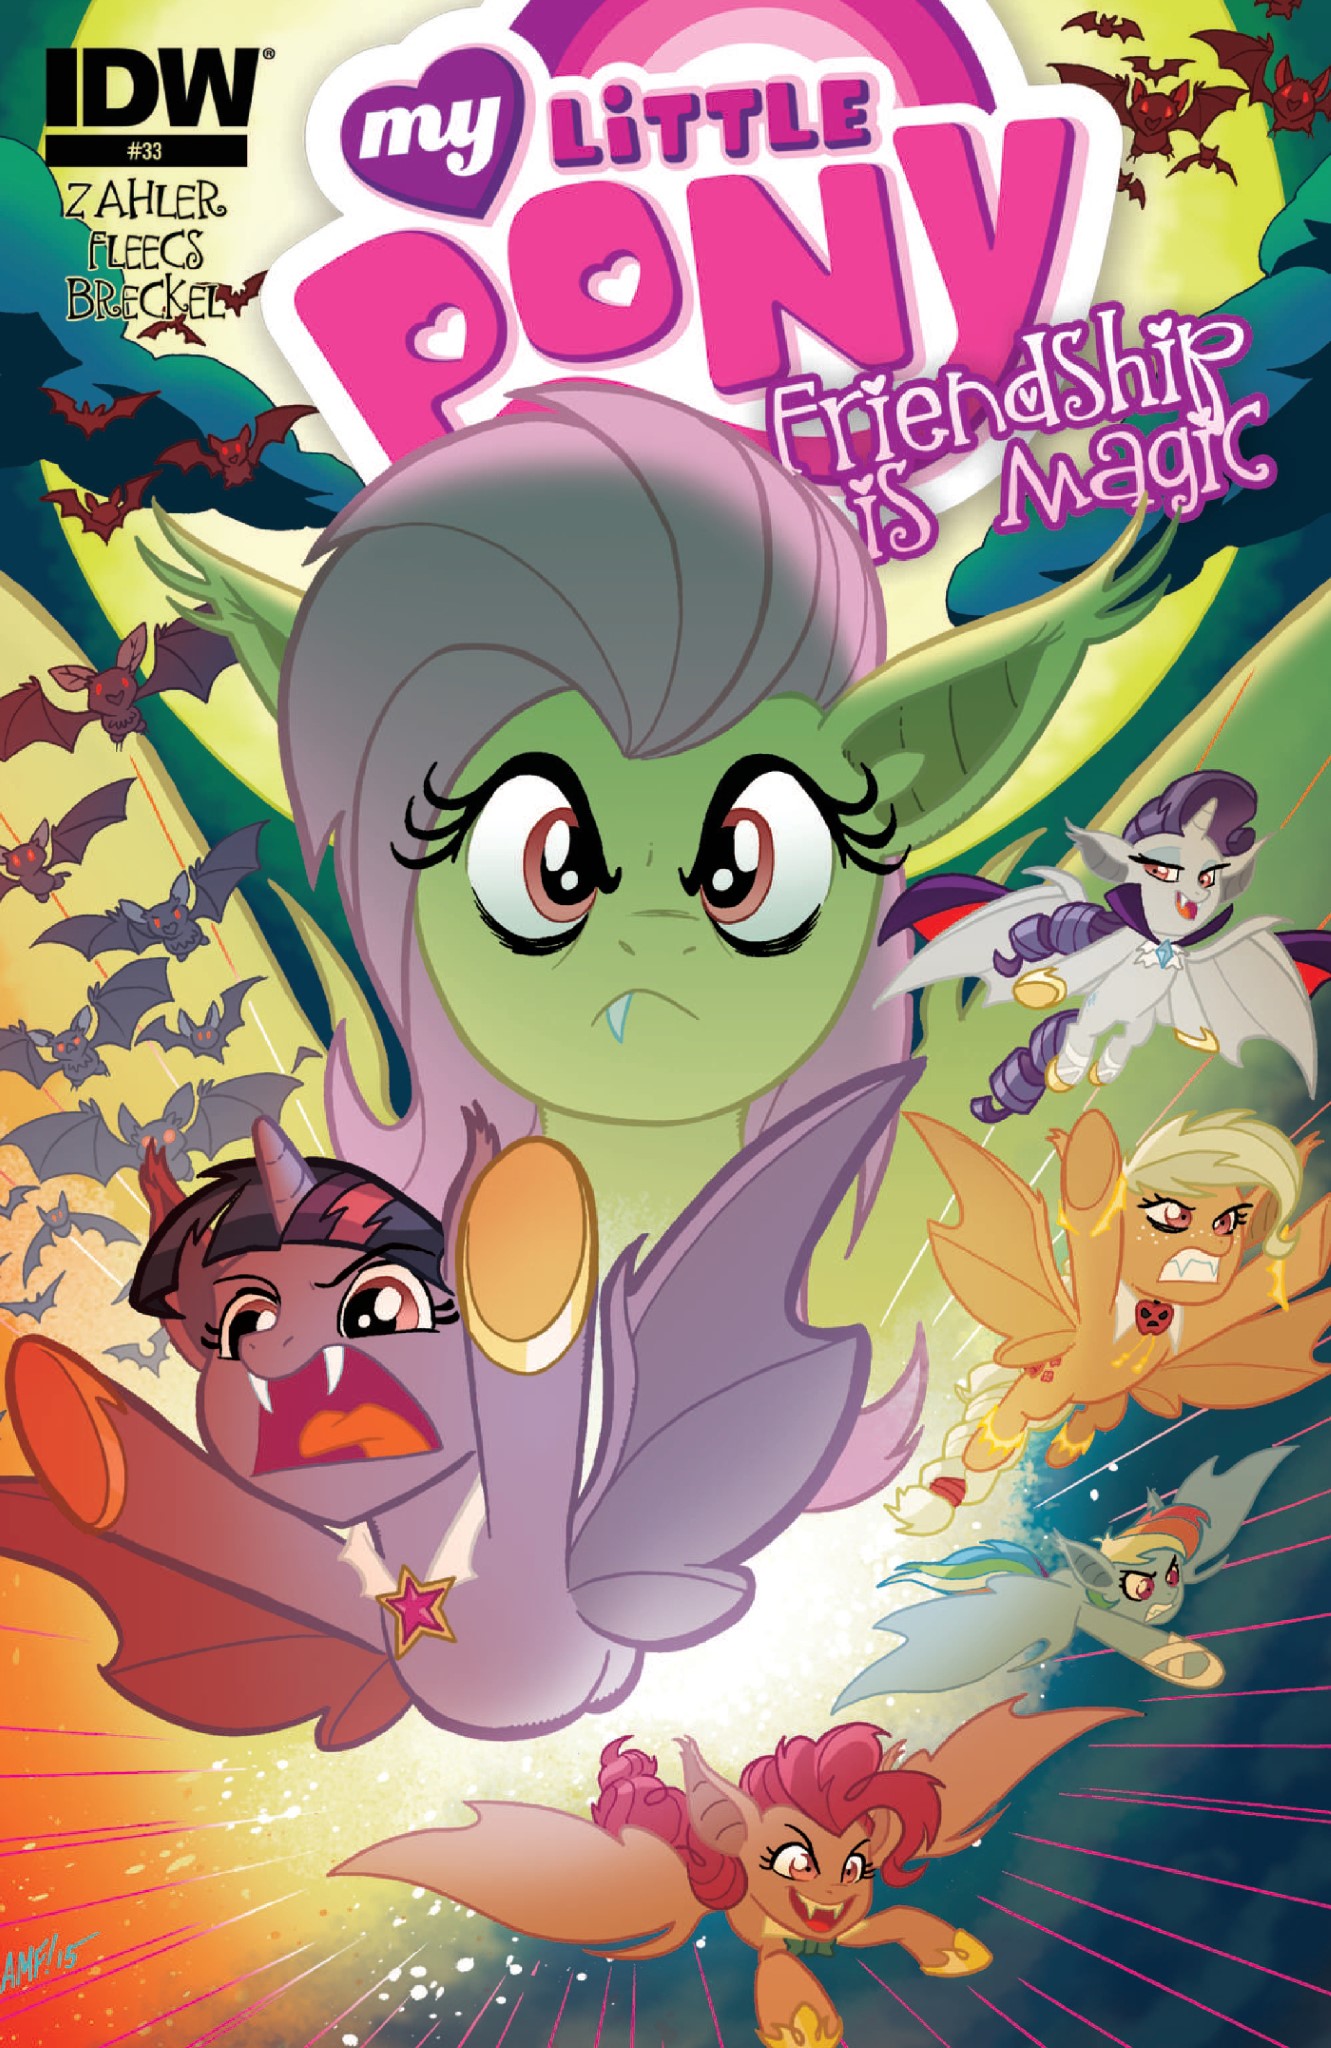 Read online My Little Pony: Friendship is Magic comic -  Issue #33 - 1